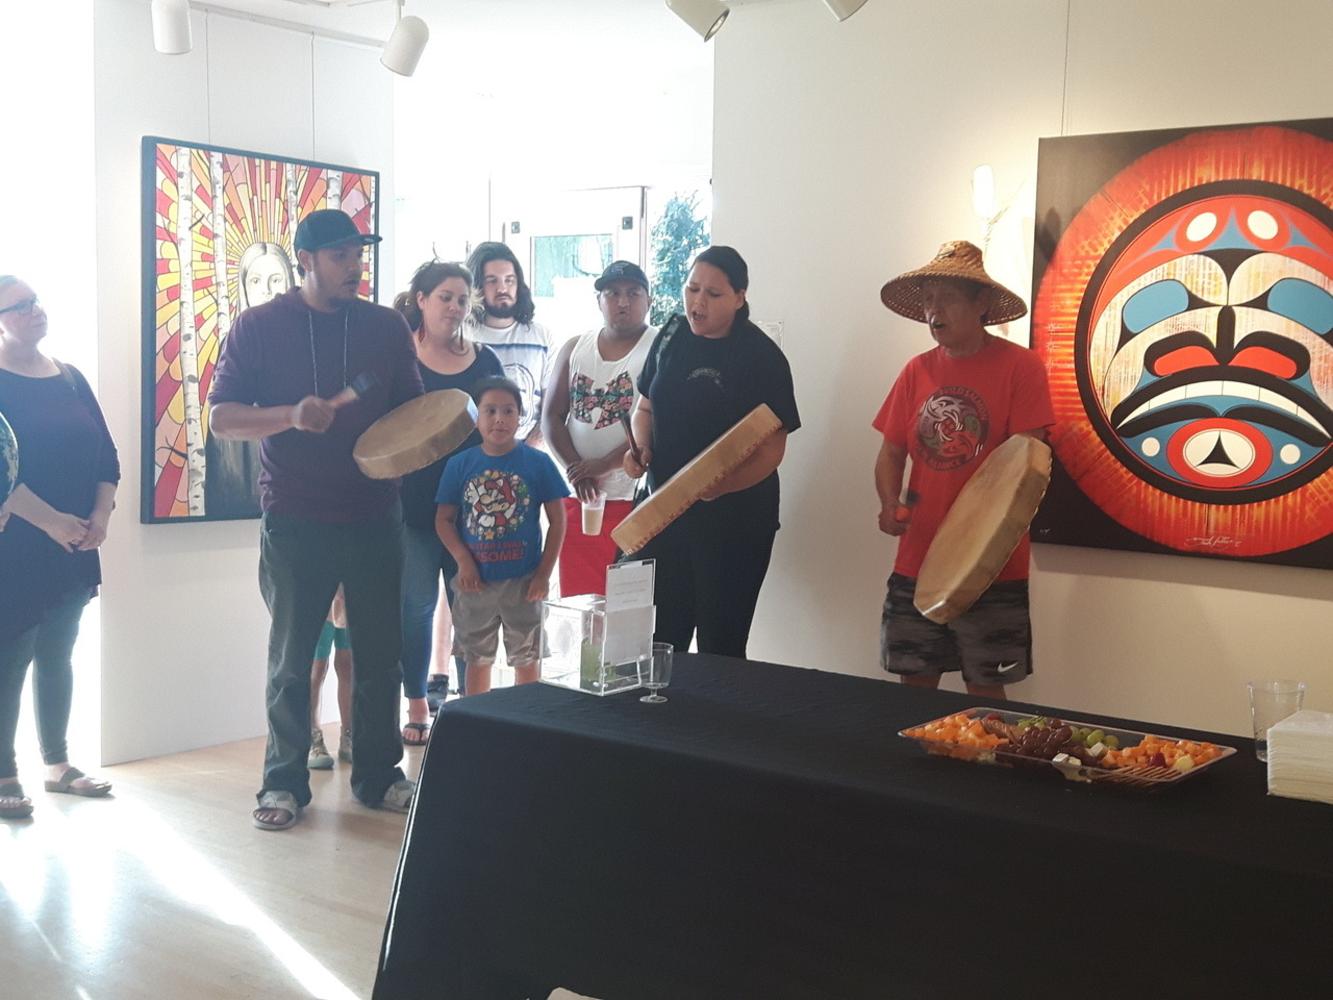 Making waves with Indigenous art